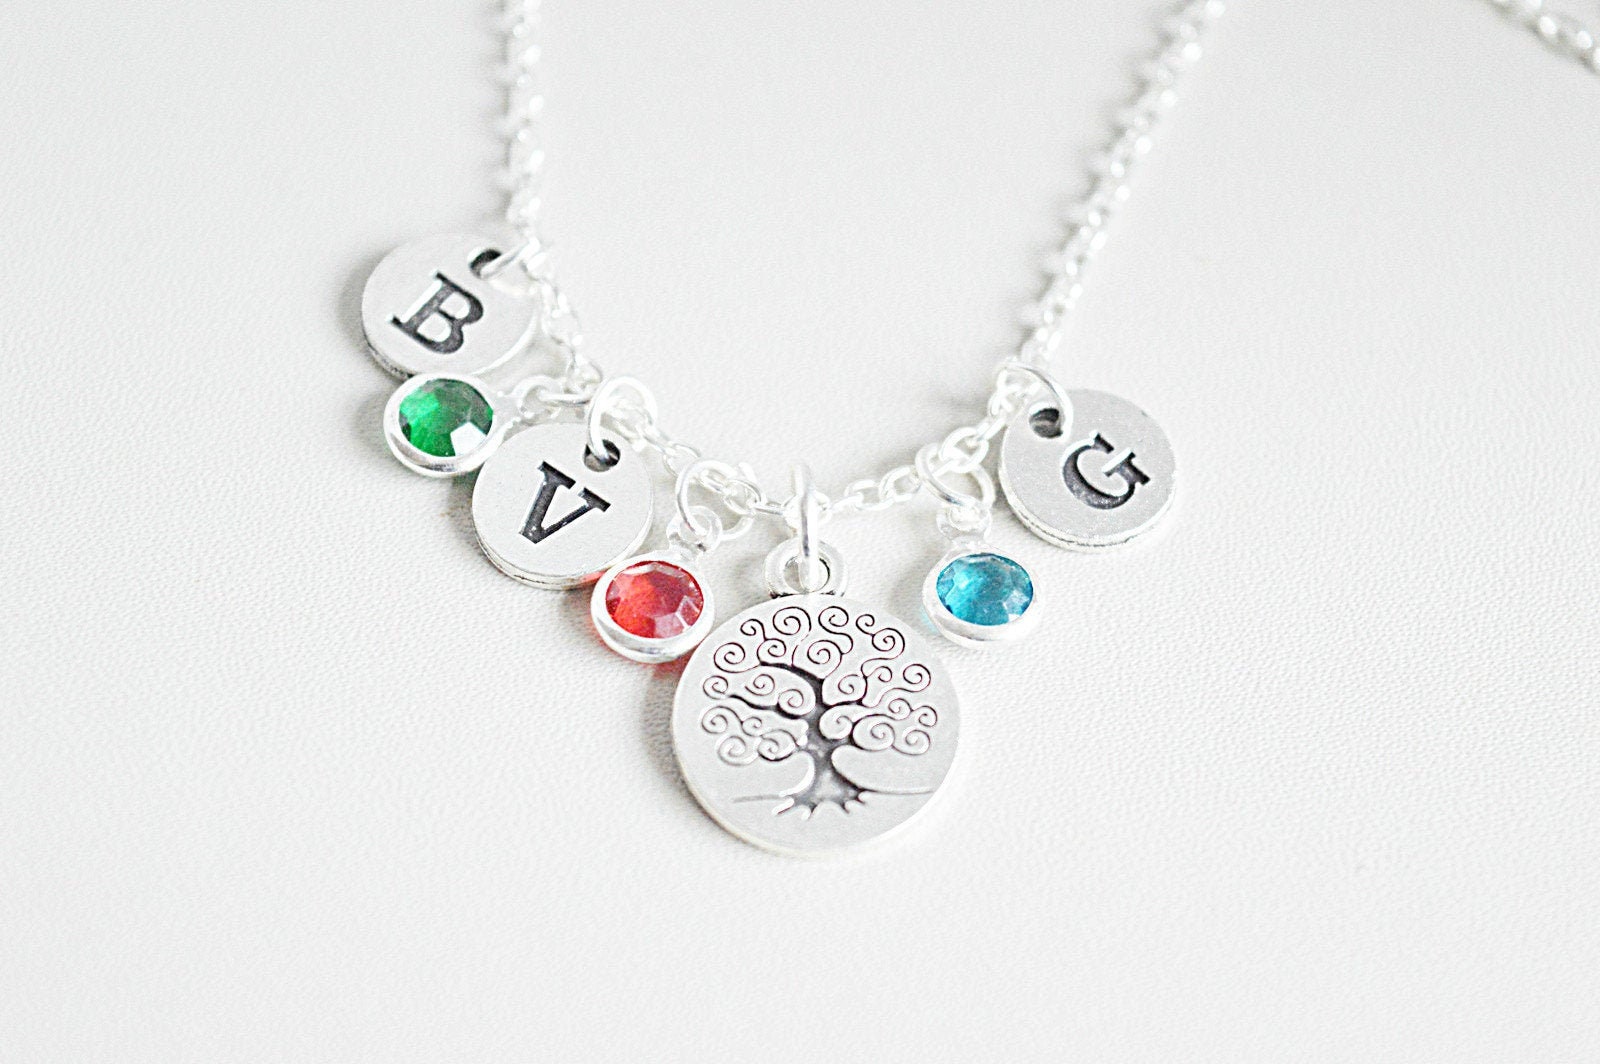 Family Necklace, Mother Necklace, Sisters Necklace, Grandmother Gift, Family Jewelry, Gift for Wife, Gift for Her, Family Tree, Grandma